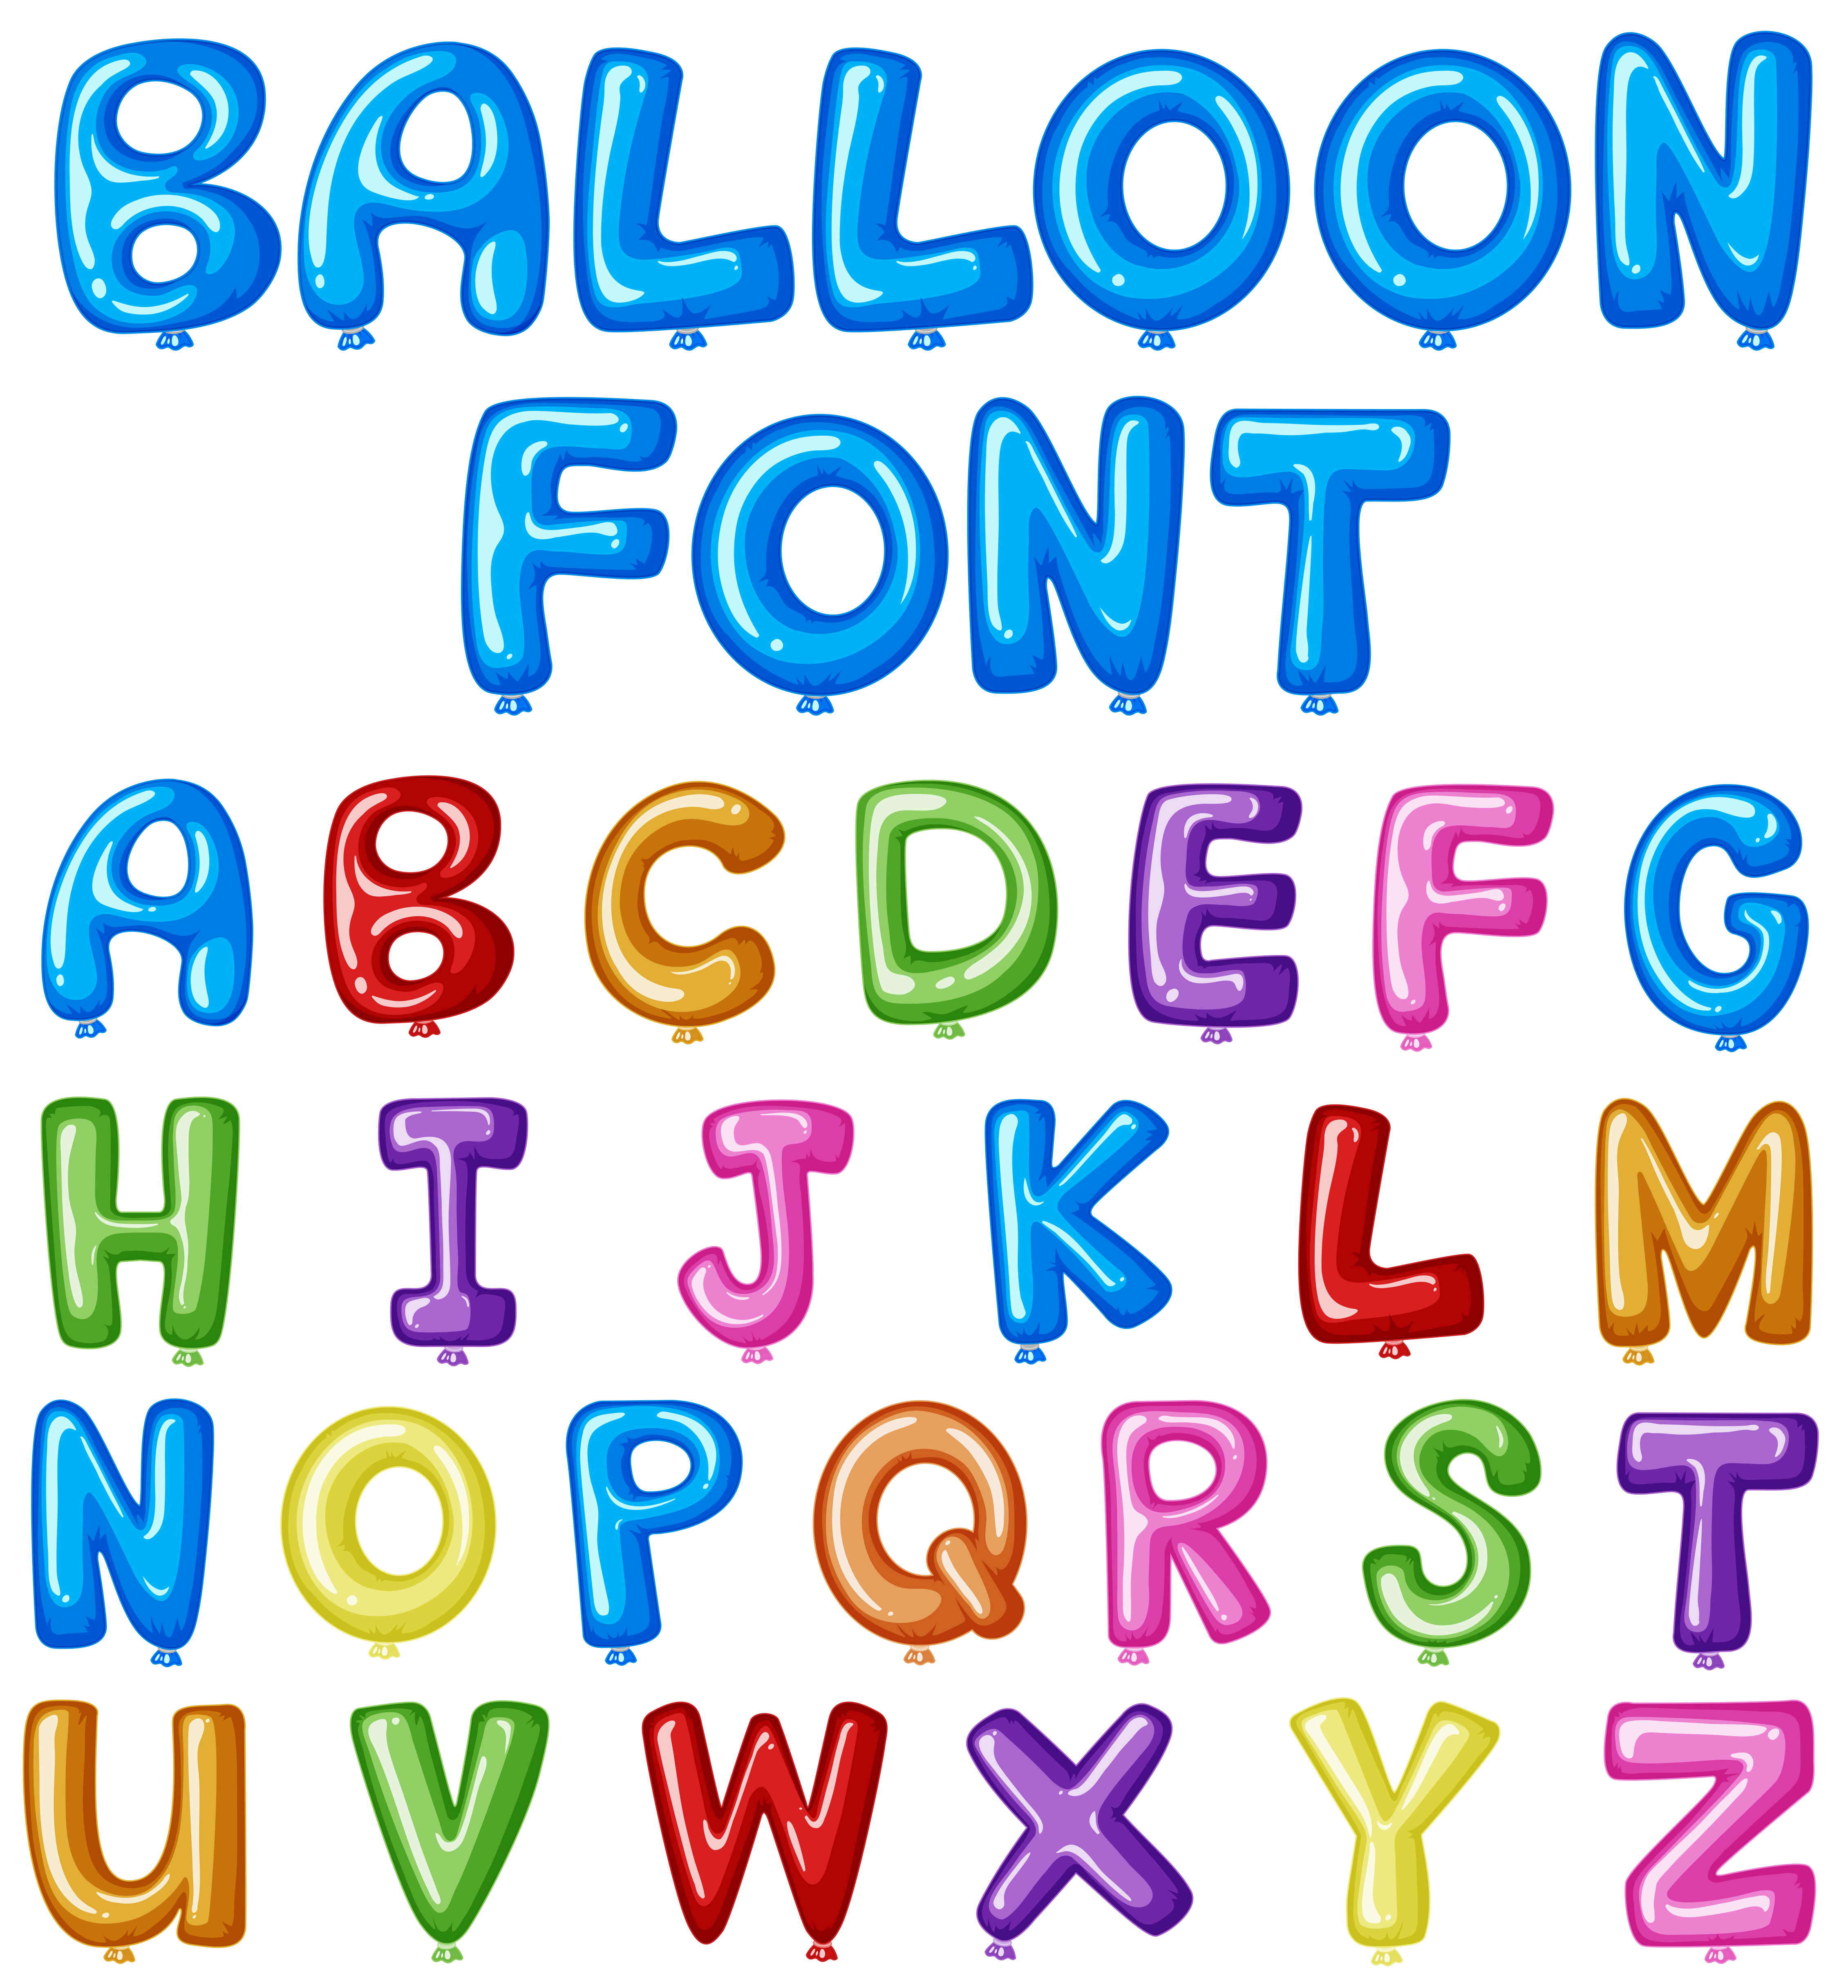 Download Font design alphabets in balloon shape - Download Free ...